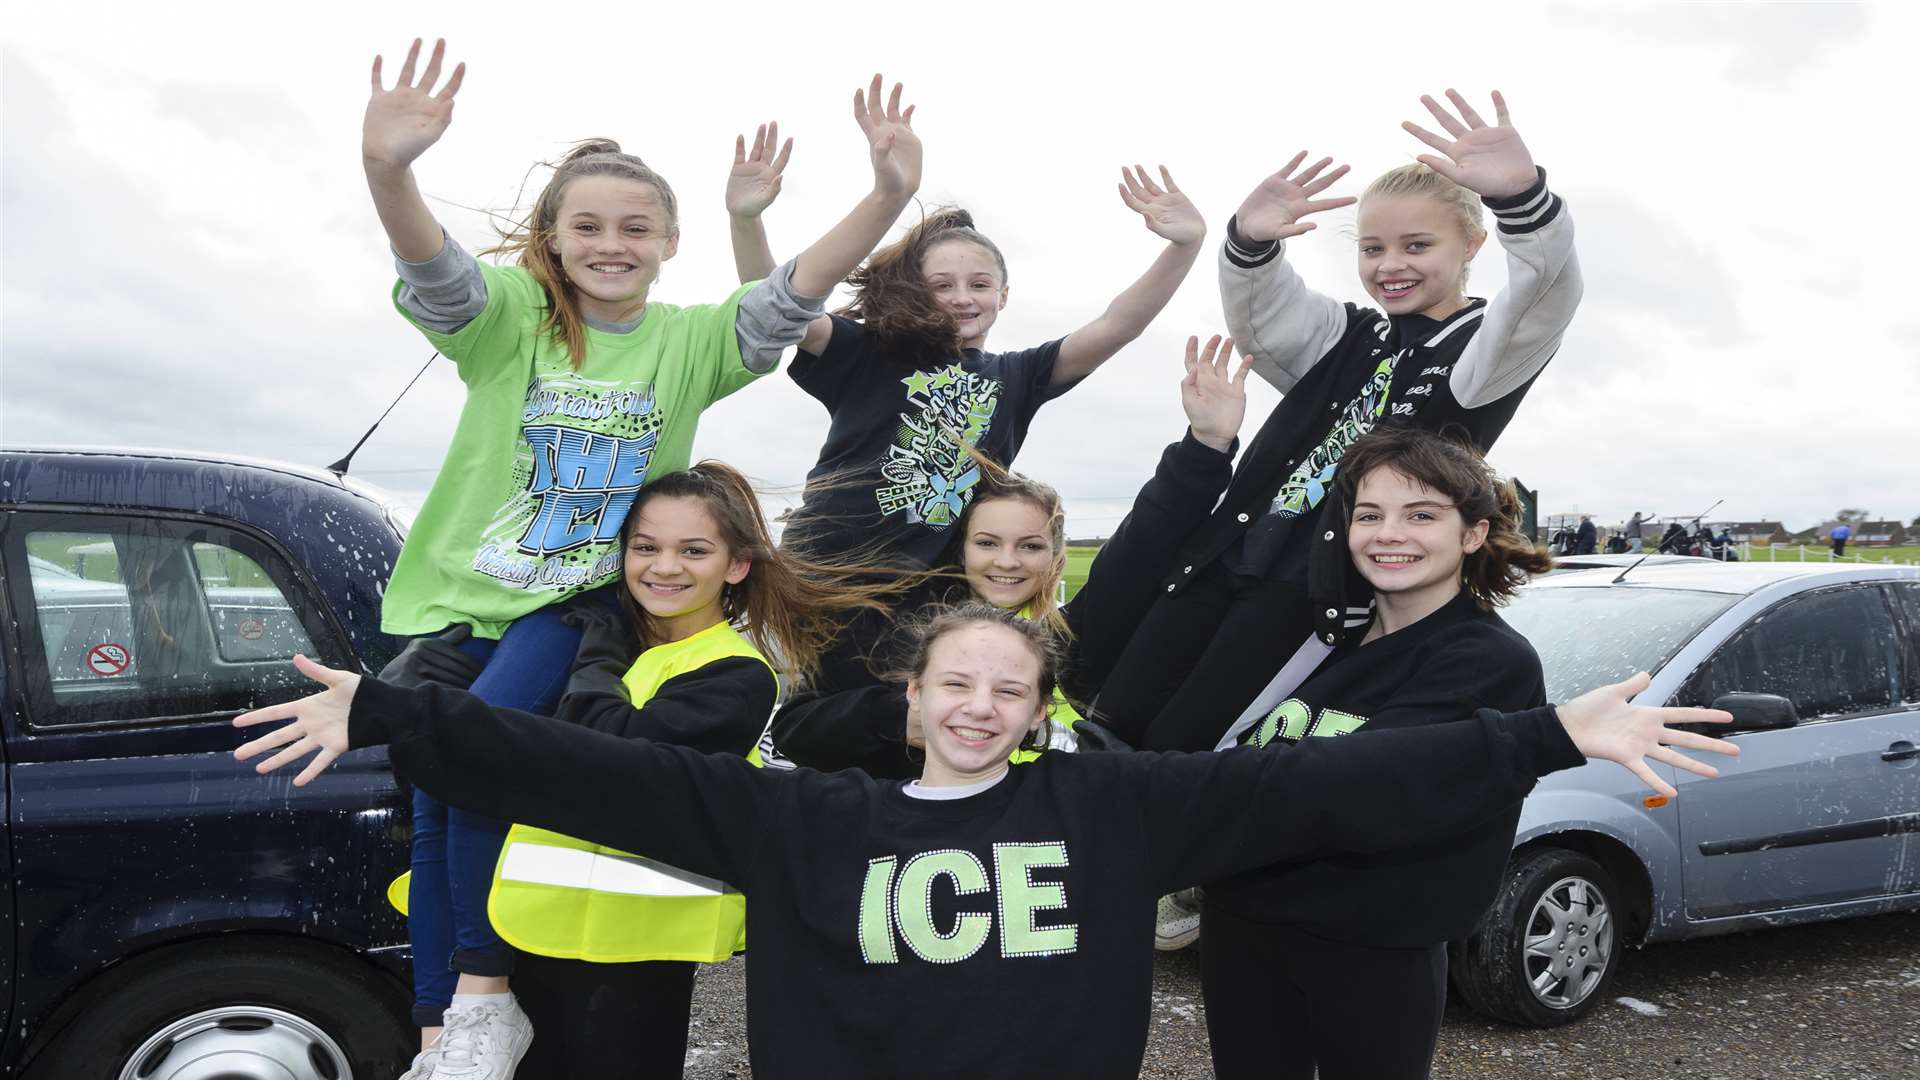 The Intensity Extreme Cheer Academy (ICE5) at Southern Valley Golf Club